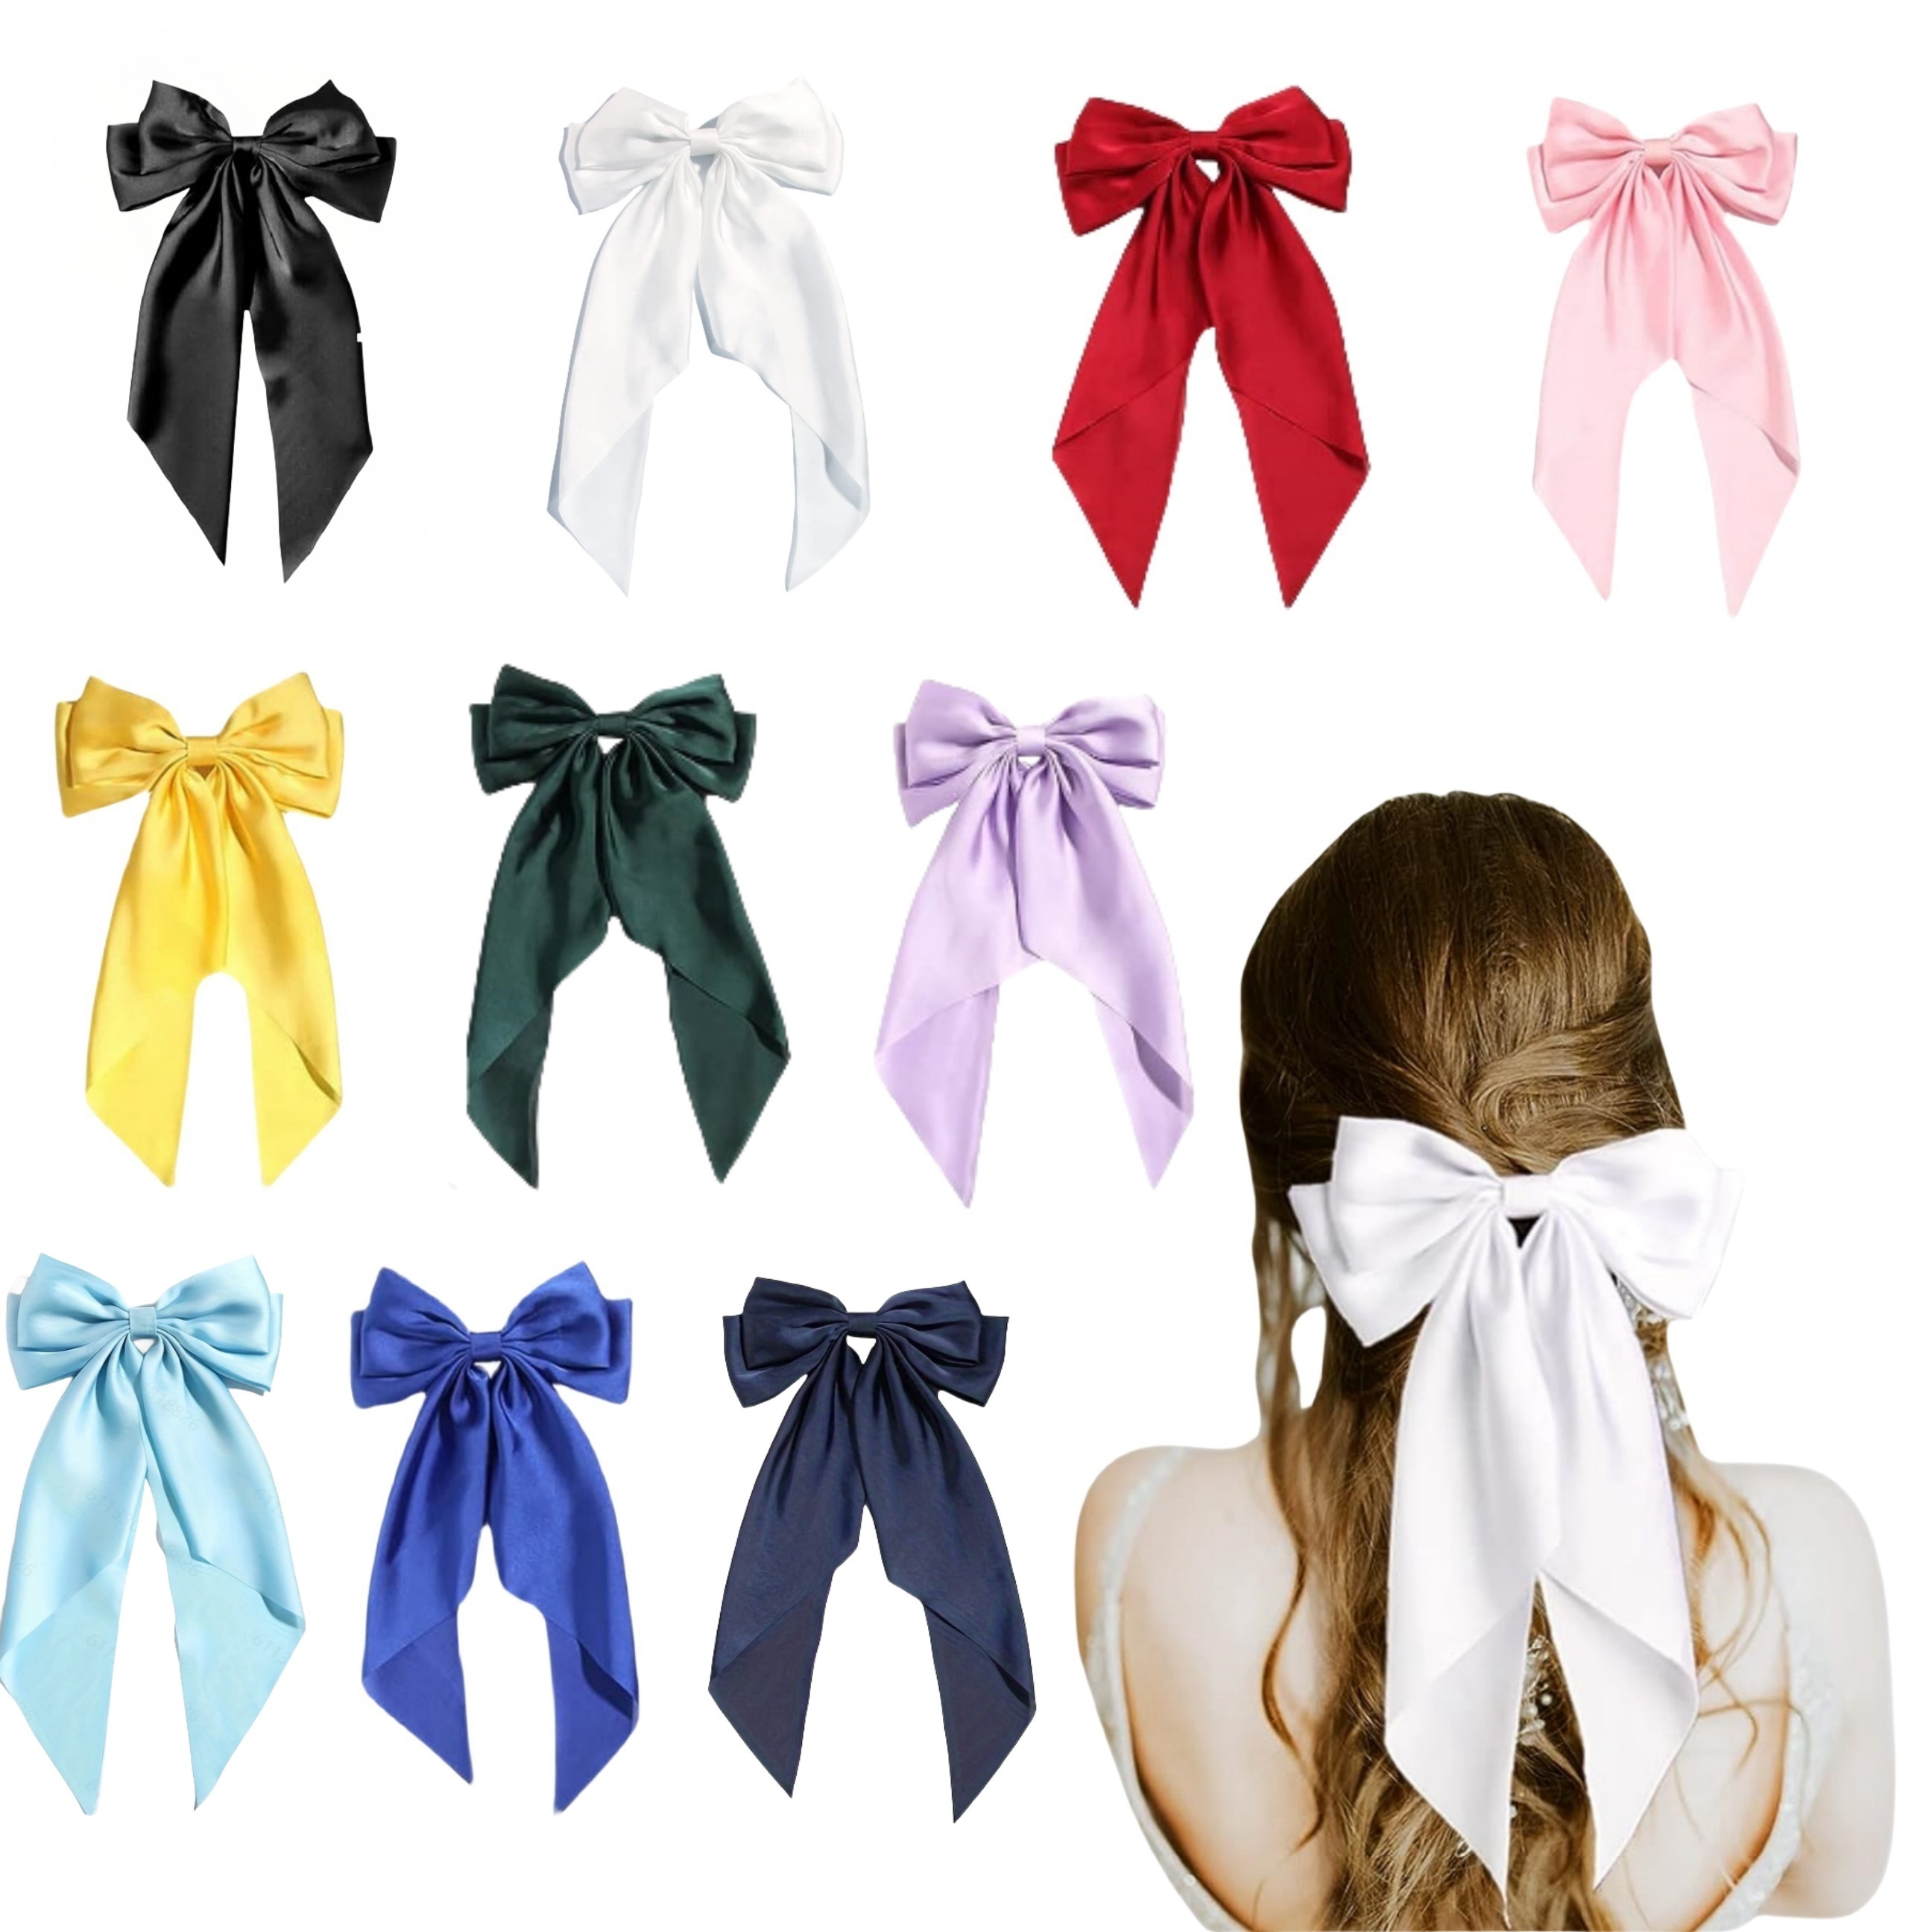  Side Hair Clips Bow Satin Ribbon Hair Clips for Women Girls  Hair Accessories Red Black Bowknot Hairpin Hair Bow Side Clips 3 Pairs :  Beauty & Personal Care